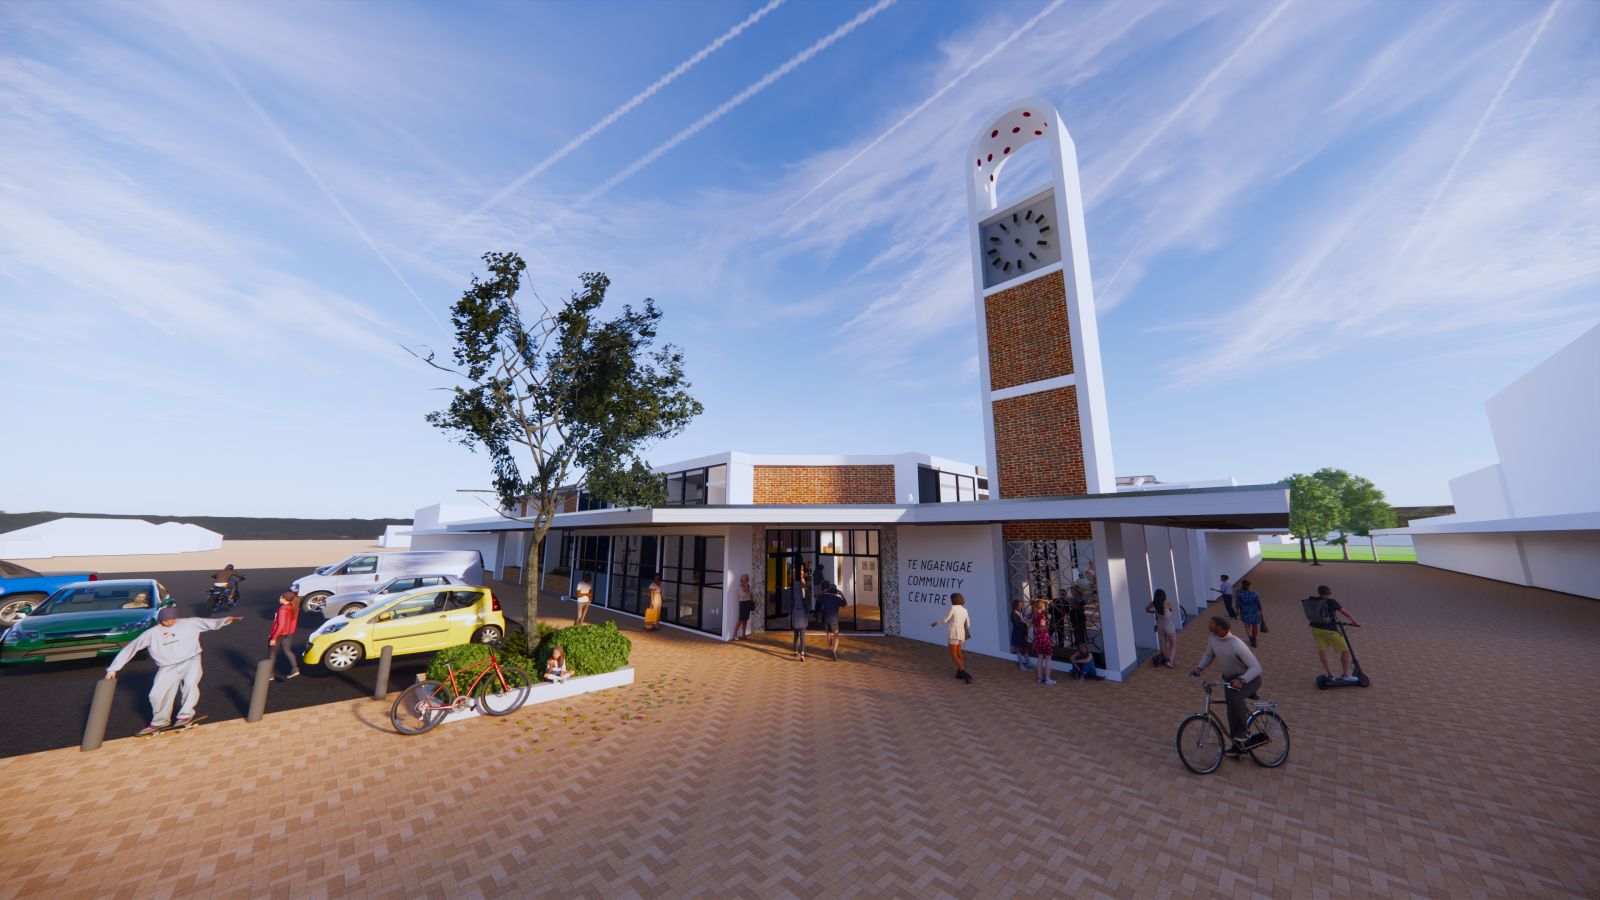 An artistic impression of the exterior of Naenae Community Centre, a mid-century style single-level building with a clock tower. banner image